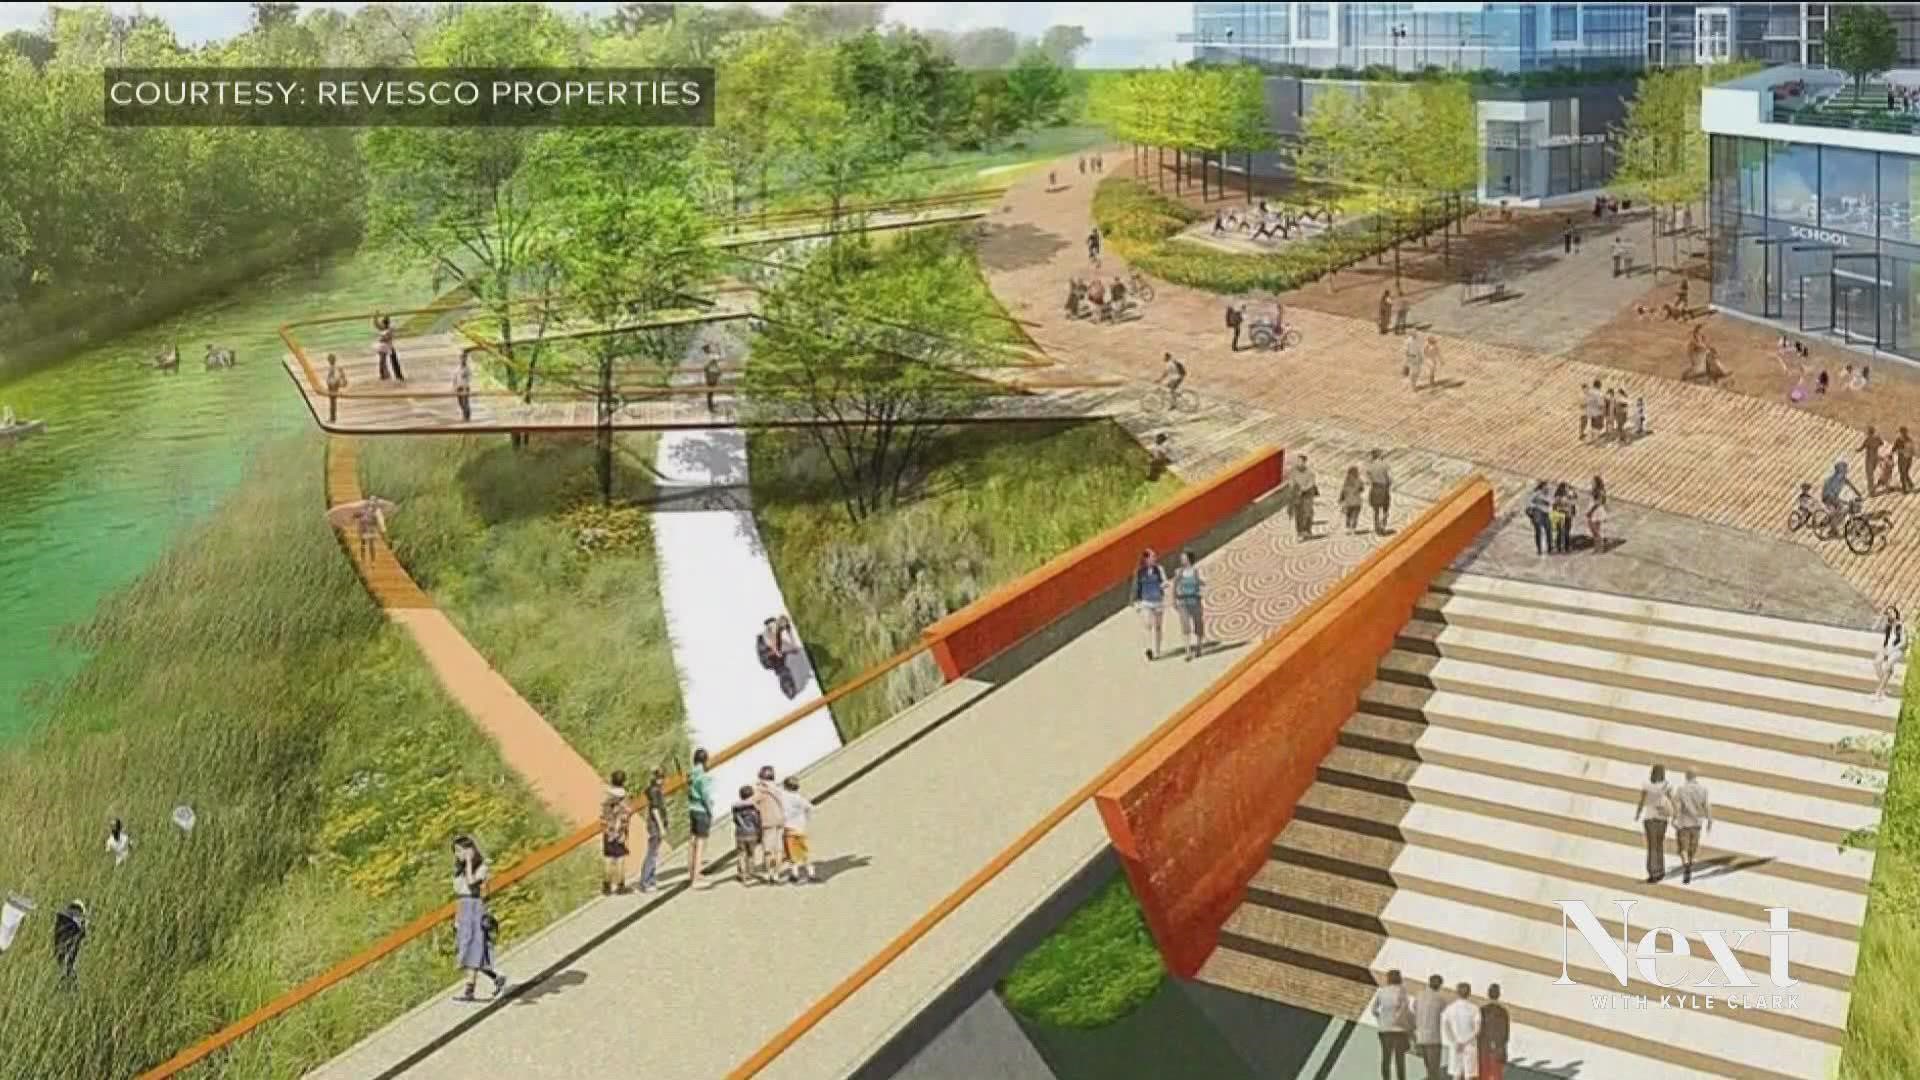 There's a massive development project planned for the land next to the park and eventually the park itself. Denver says it's in the permit phase.